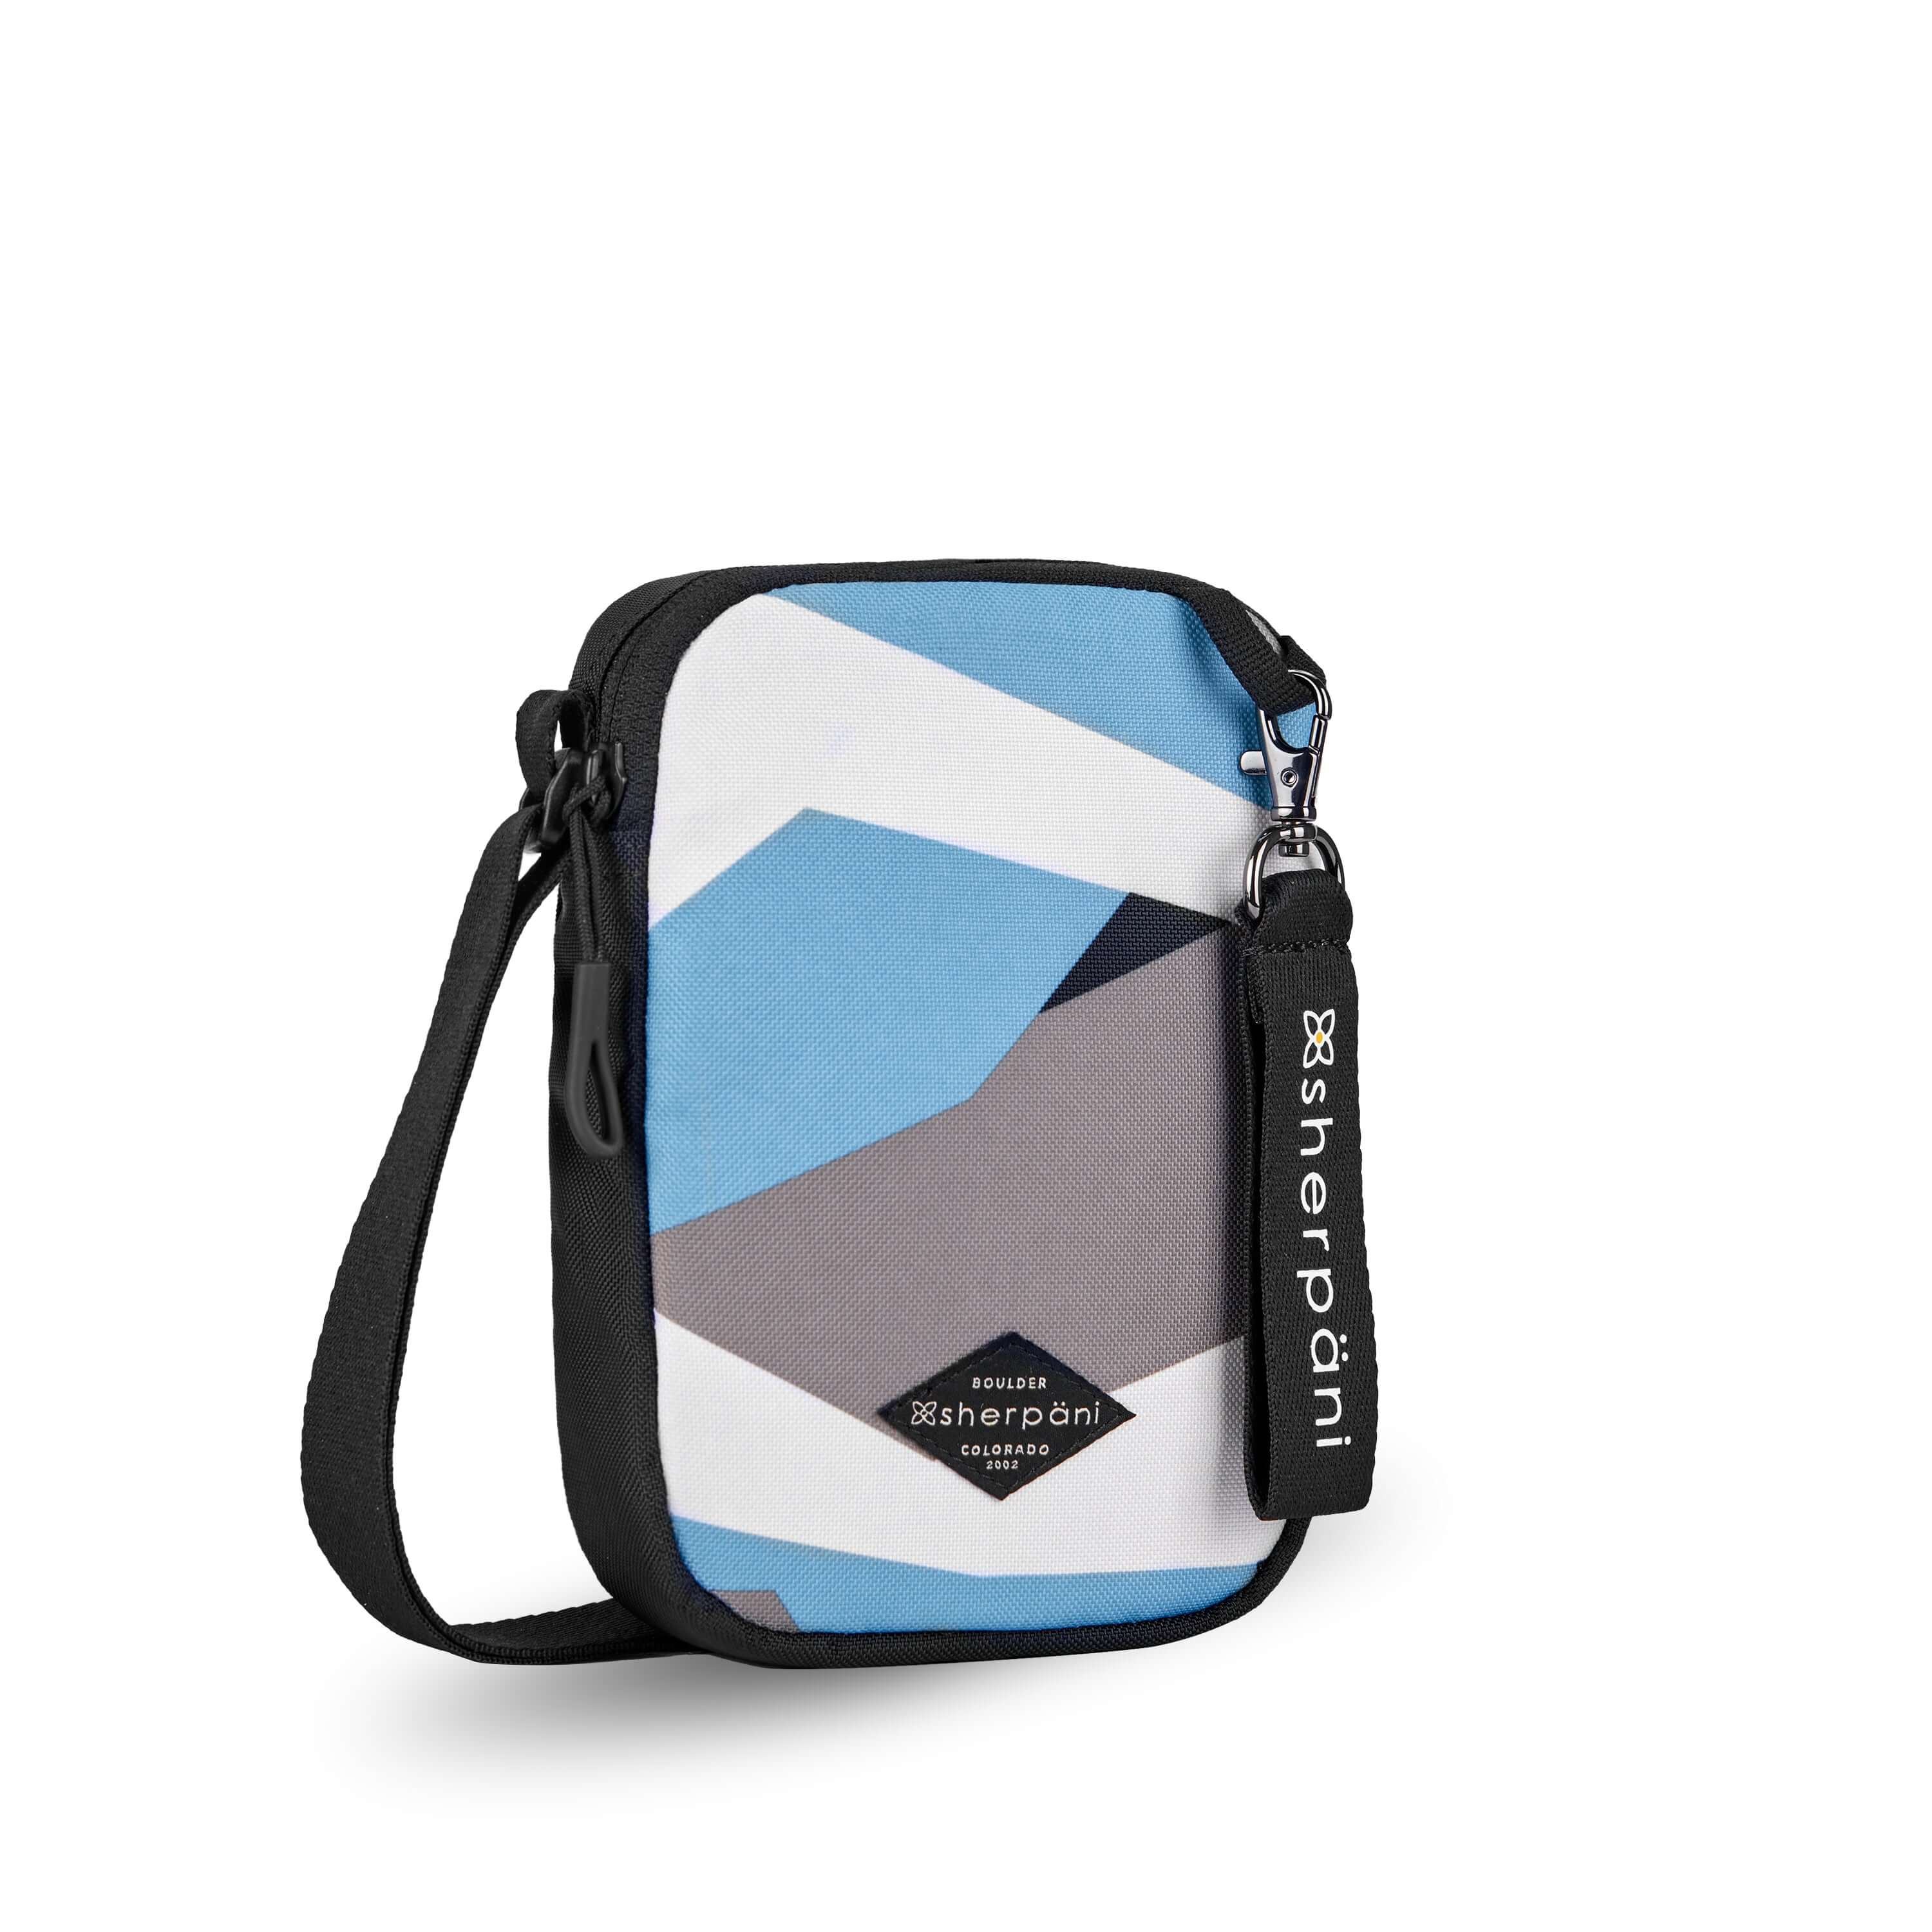 Angled front view of Sherpani crossbody, the Rogue in Summer Camo. The bag is two toned: the front is a camouflage pattern of light blue, gray and white, the back is black. The main zipper compartment features an easy pull zipper accented in black. The bag has an adjustable crossbody strap. A branded Sherpani keychain is clipped to a fabric loop on the top right corner. 